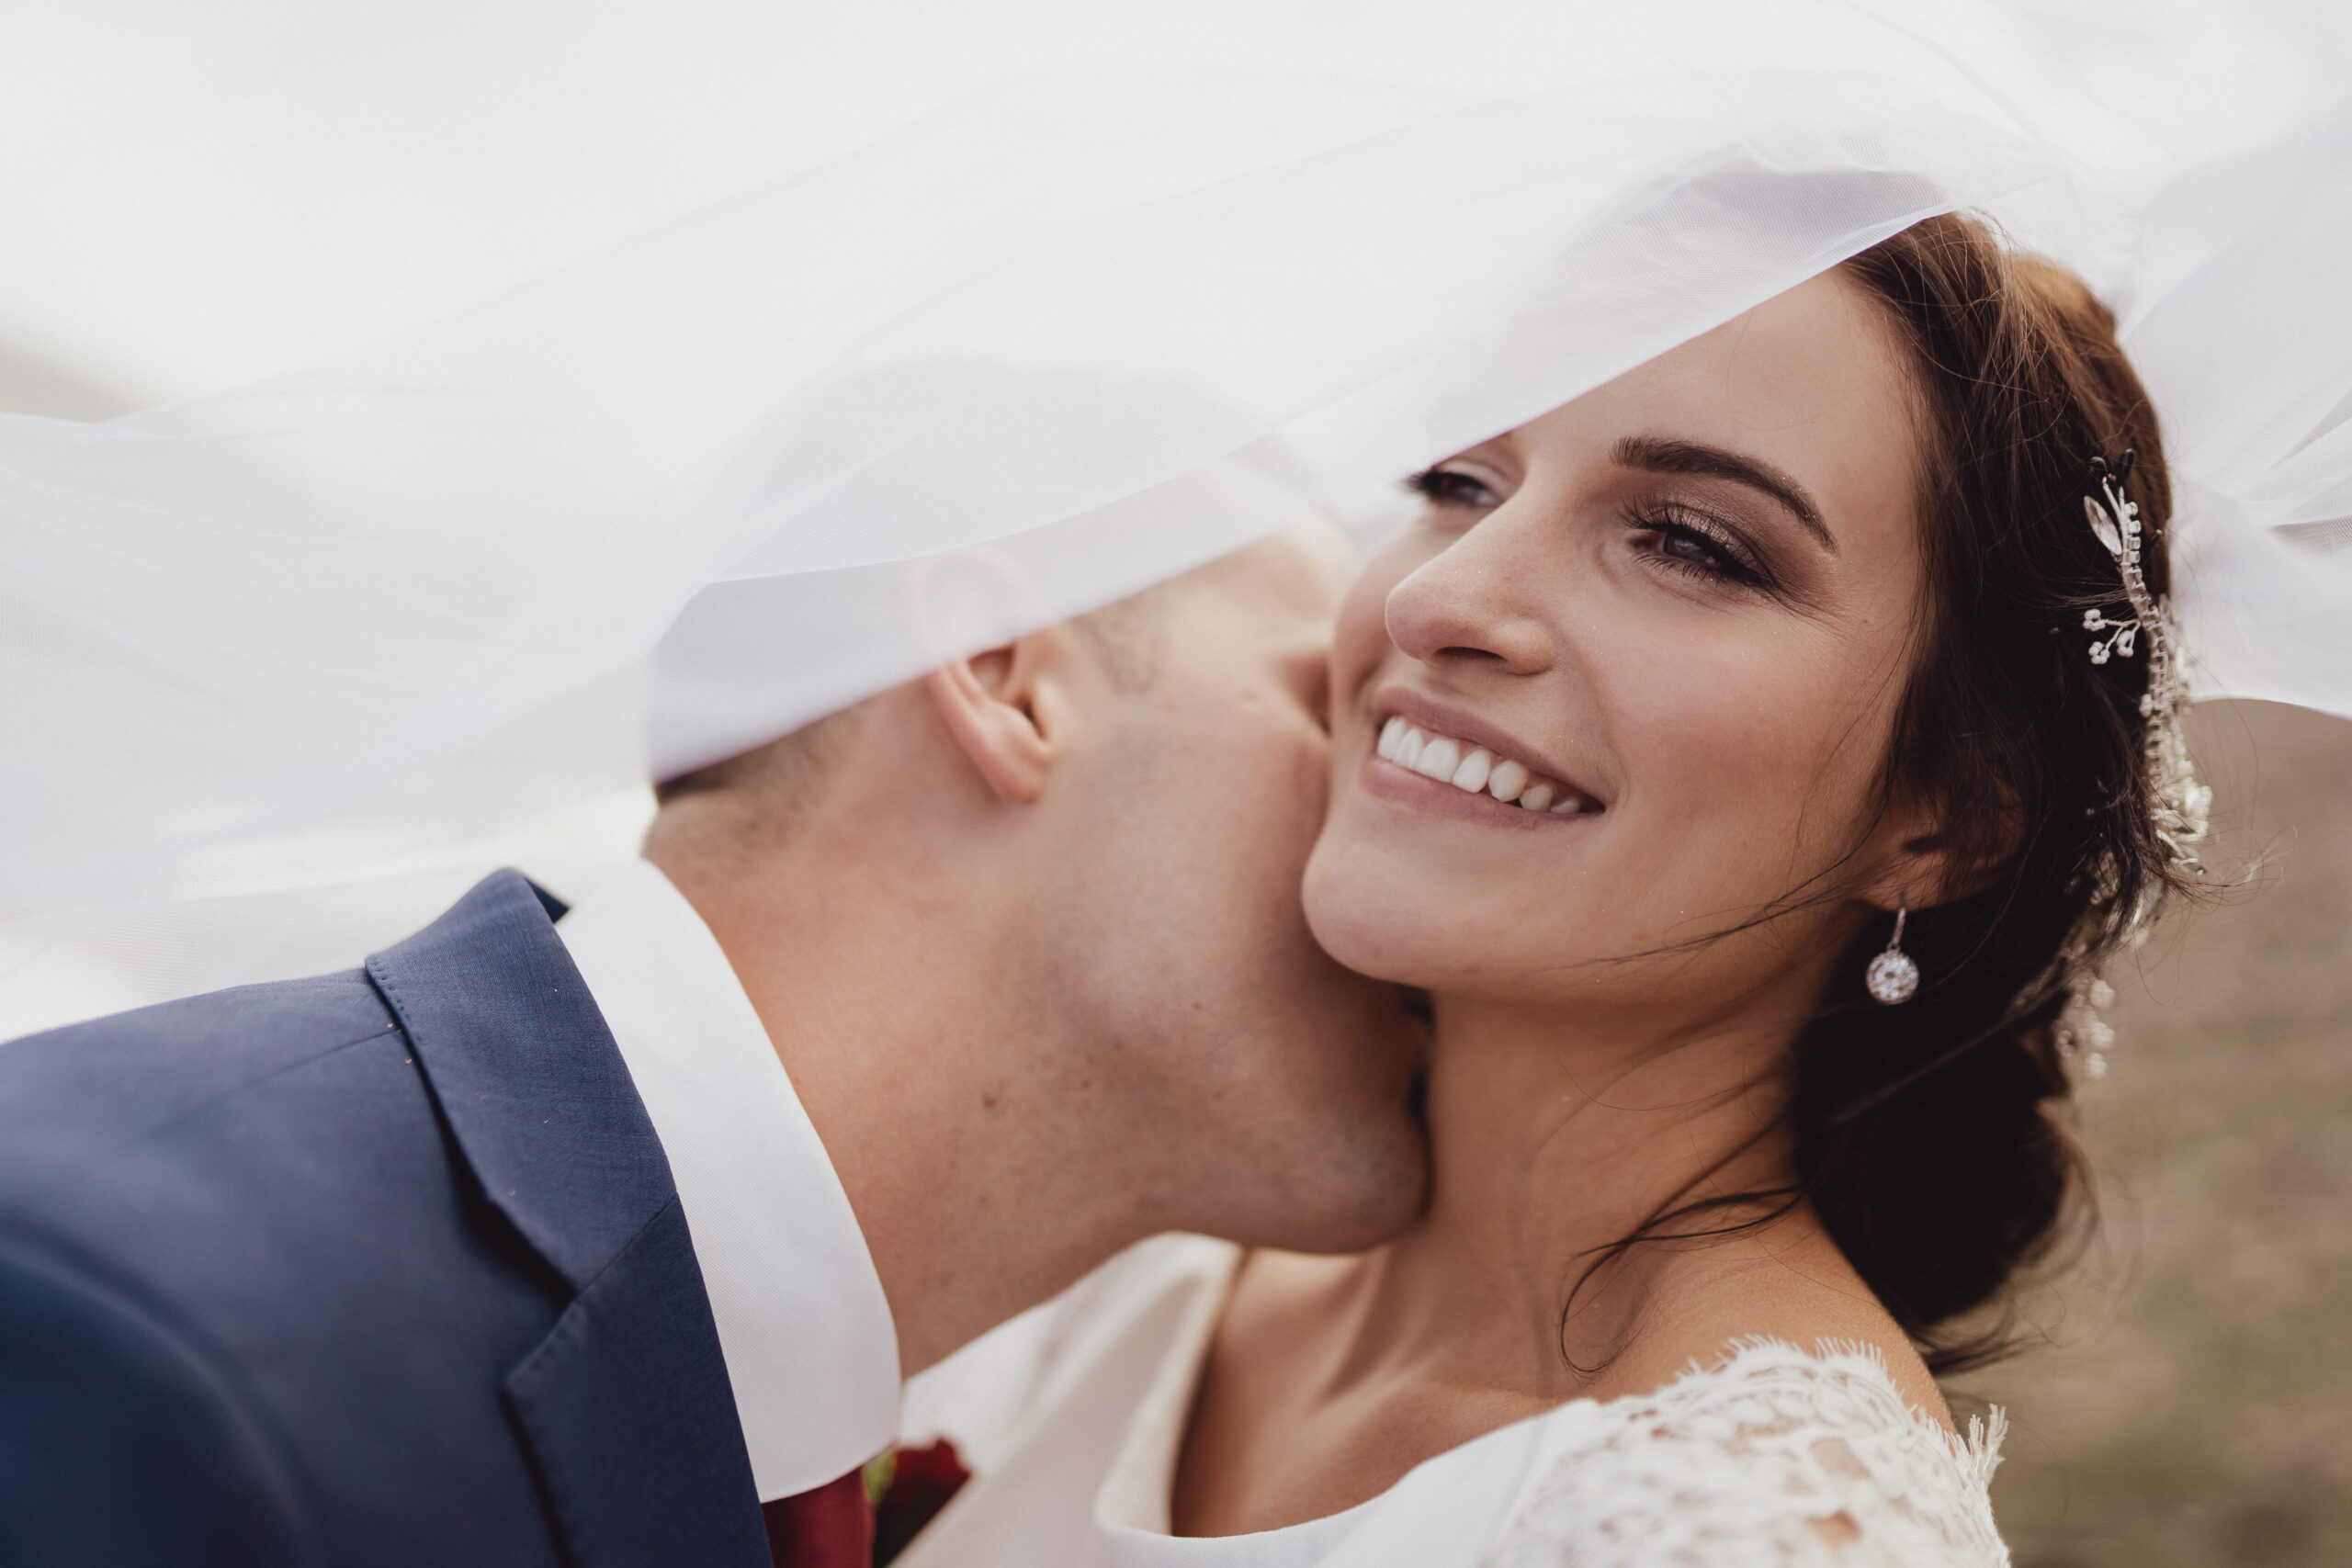 Bride and groom smiling and kissing with veil flowing in front of her face